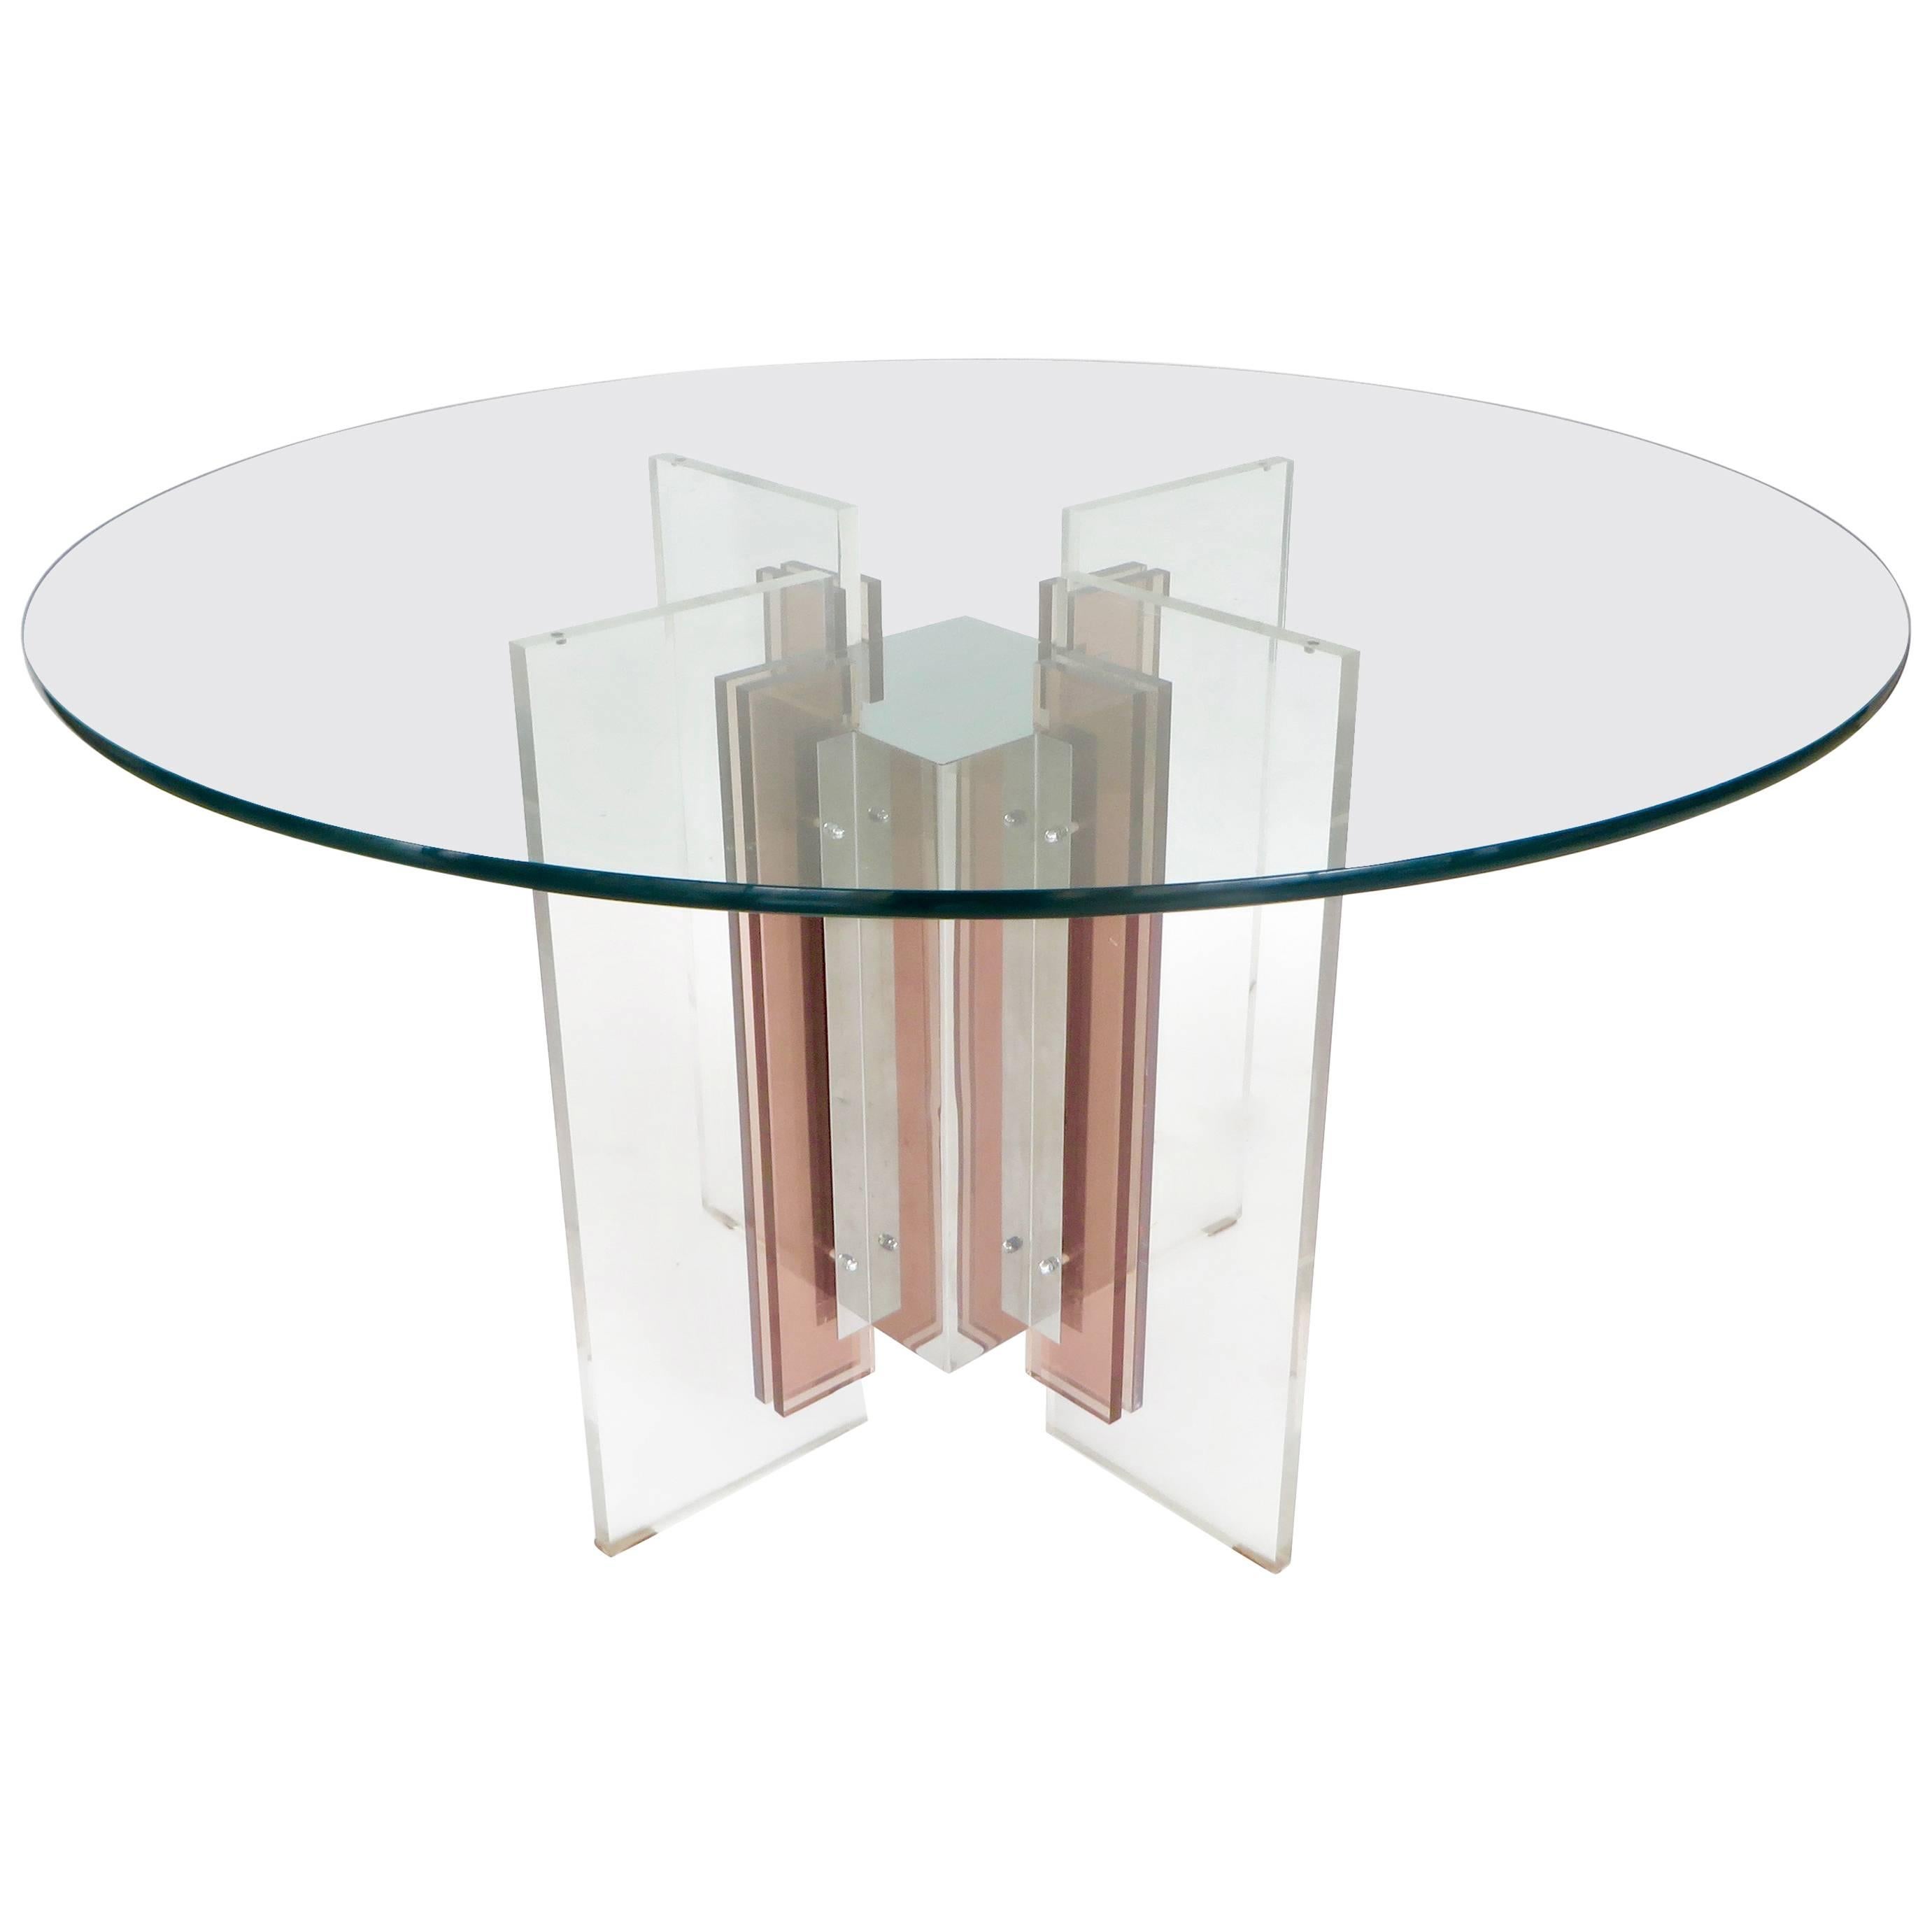 Philippe Jean French Illuminated Stainless Steel and Lucite Dining Table Signed